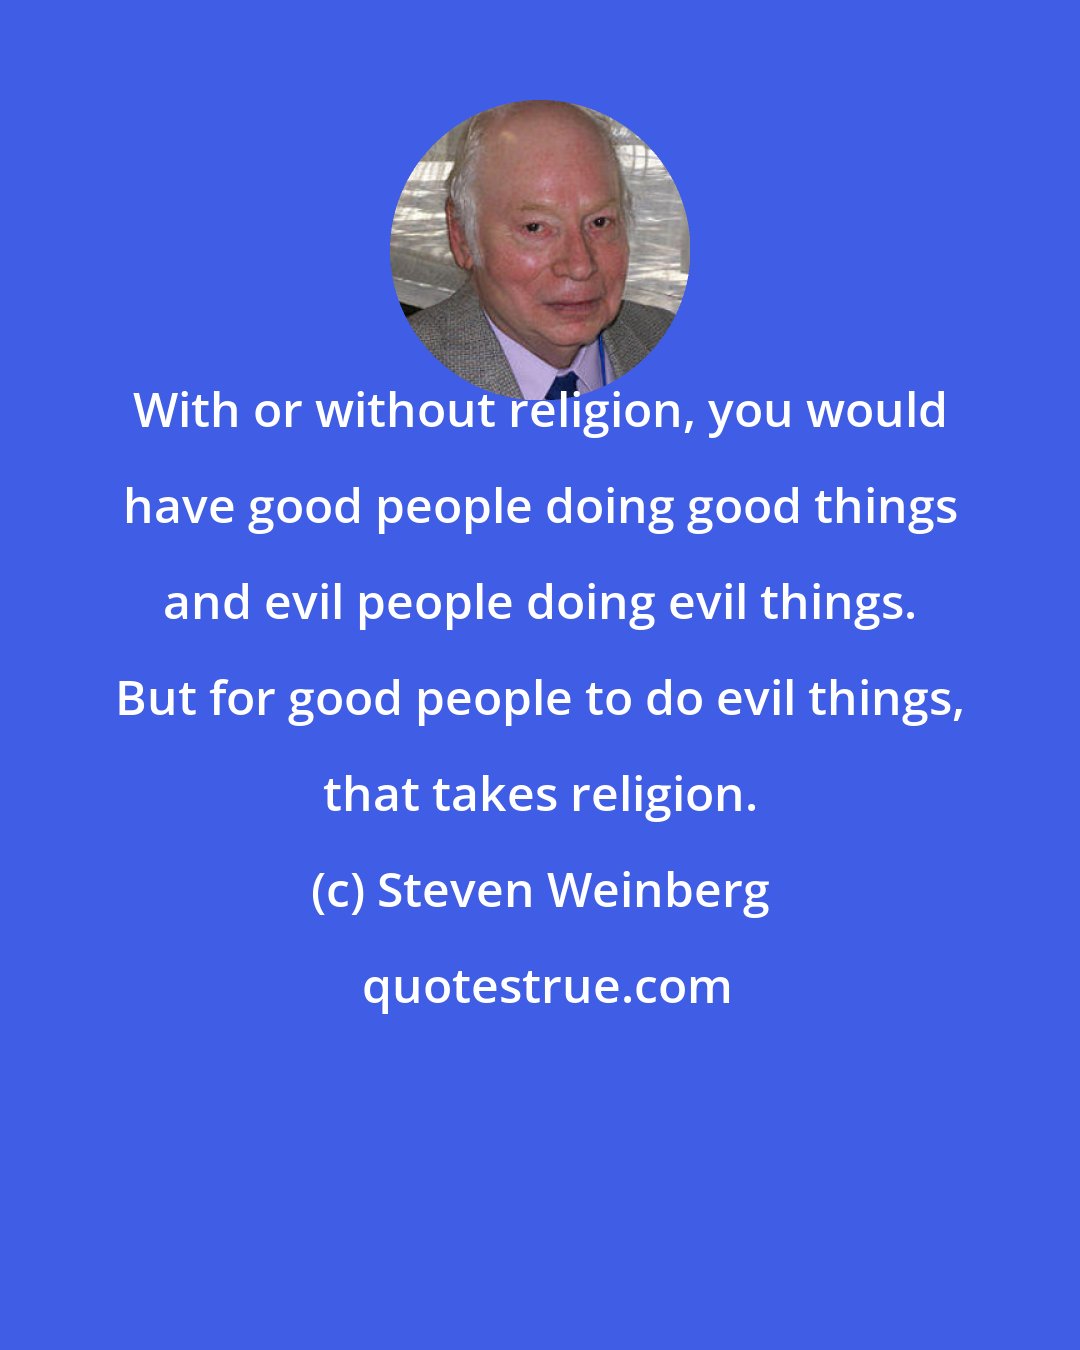 Steven Weinberg: With or without religion, you would have good people doing good things and evil people doing evil things. But for good people to do evil things, that takes religion.